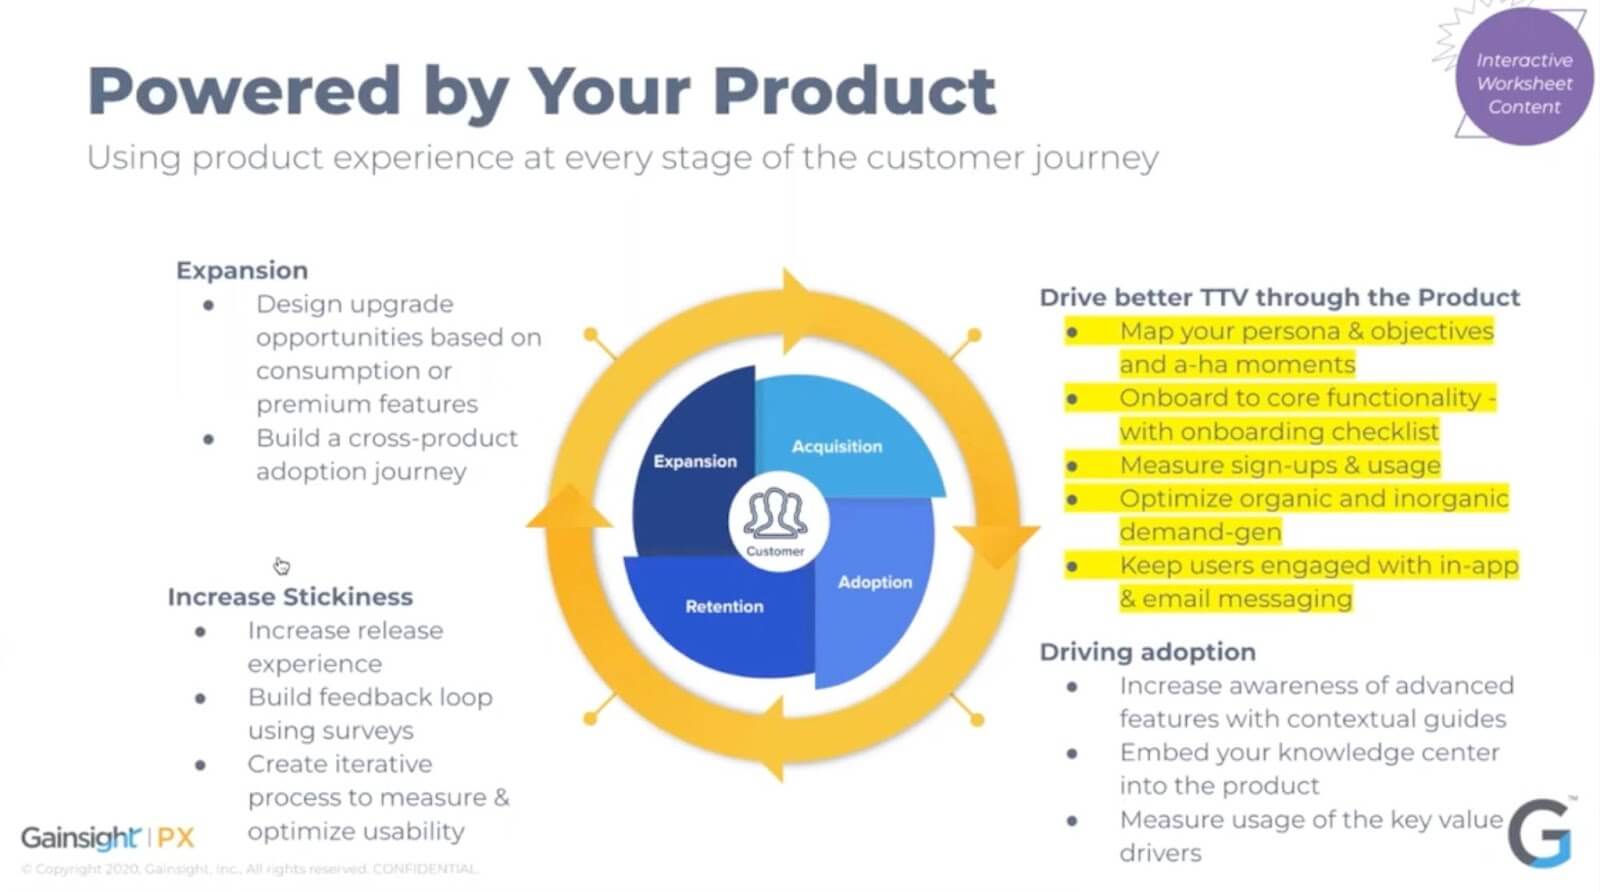 Graph showing how to use the product experience at every stage of the customer journey 